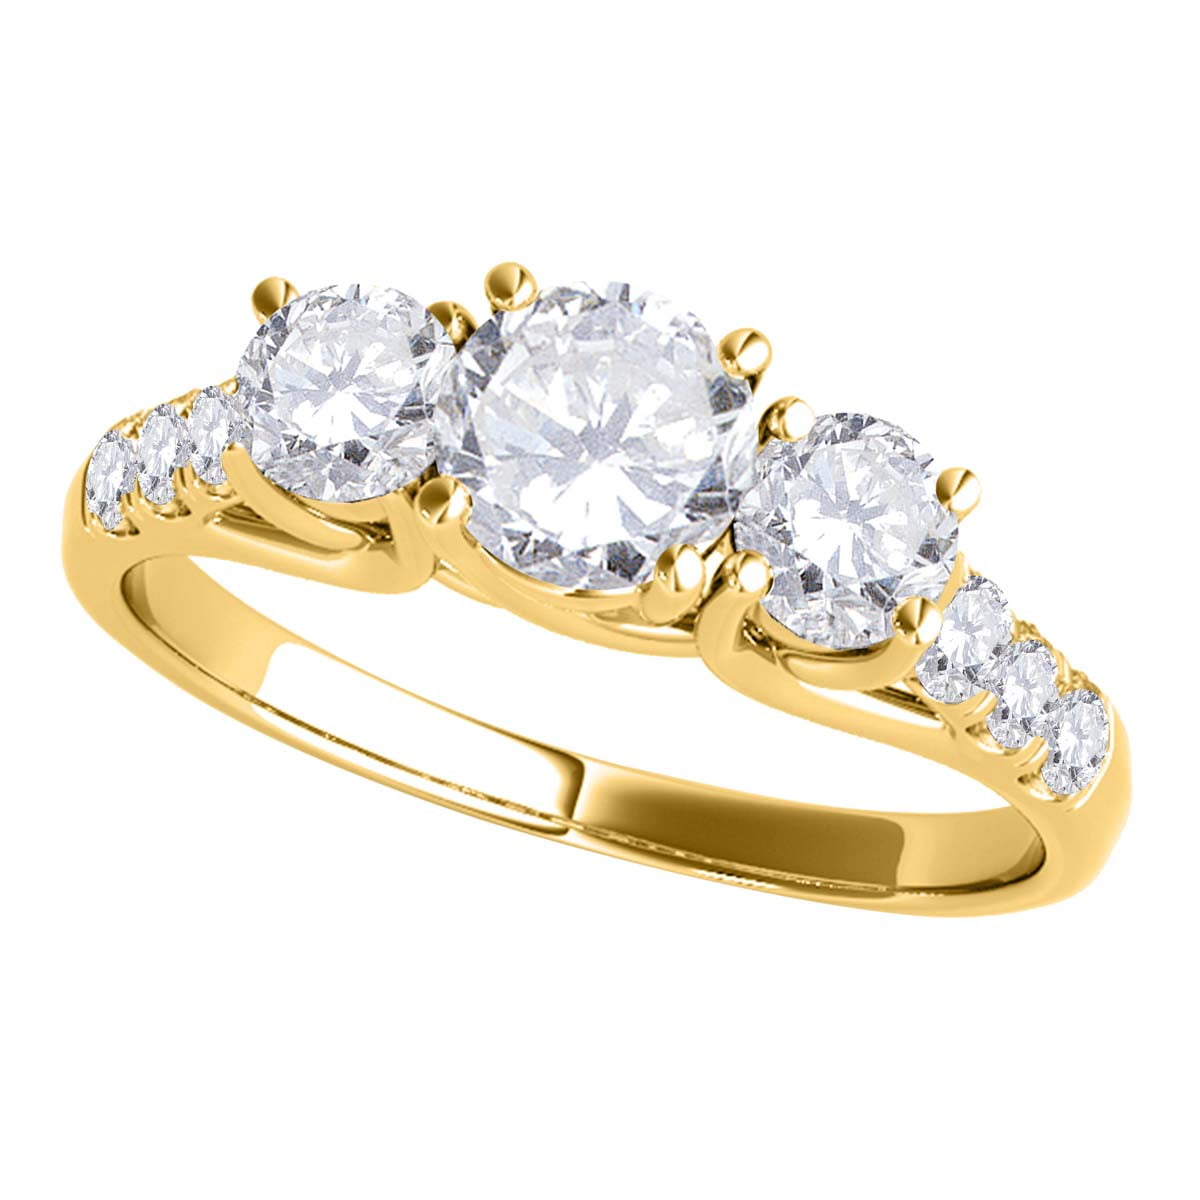 Engagement　Crafted　1/4　Ring　Carat　Yellow　Gold-　14k　In　MauliJewels　Solid